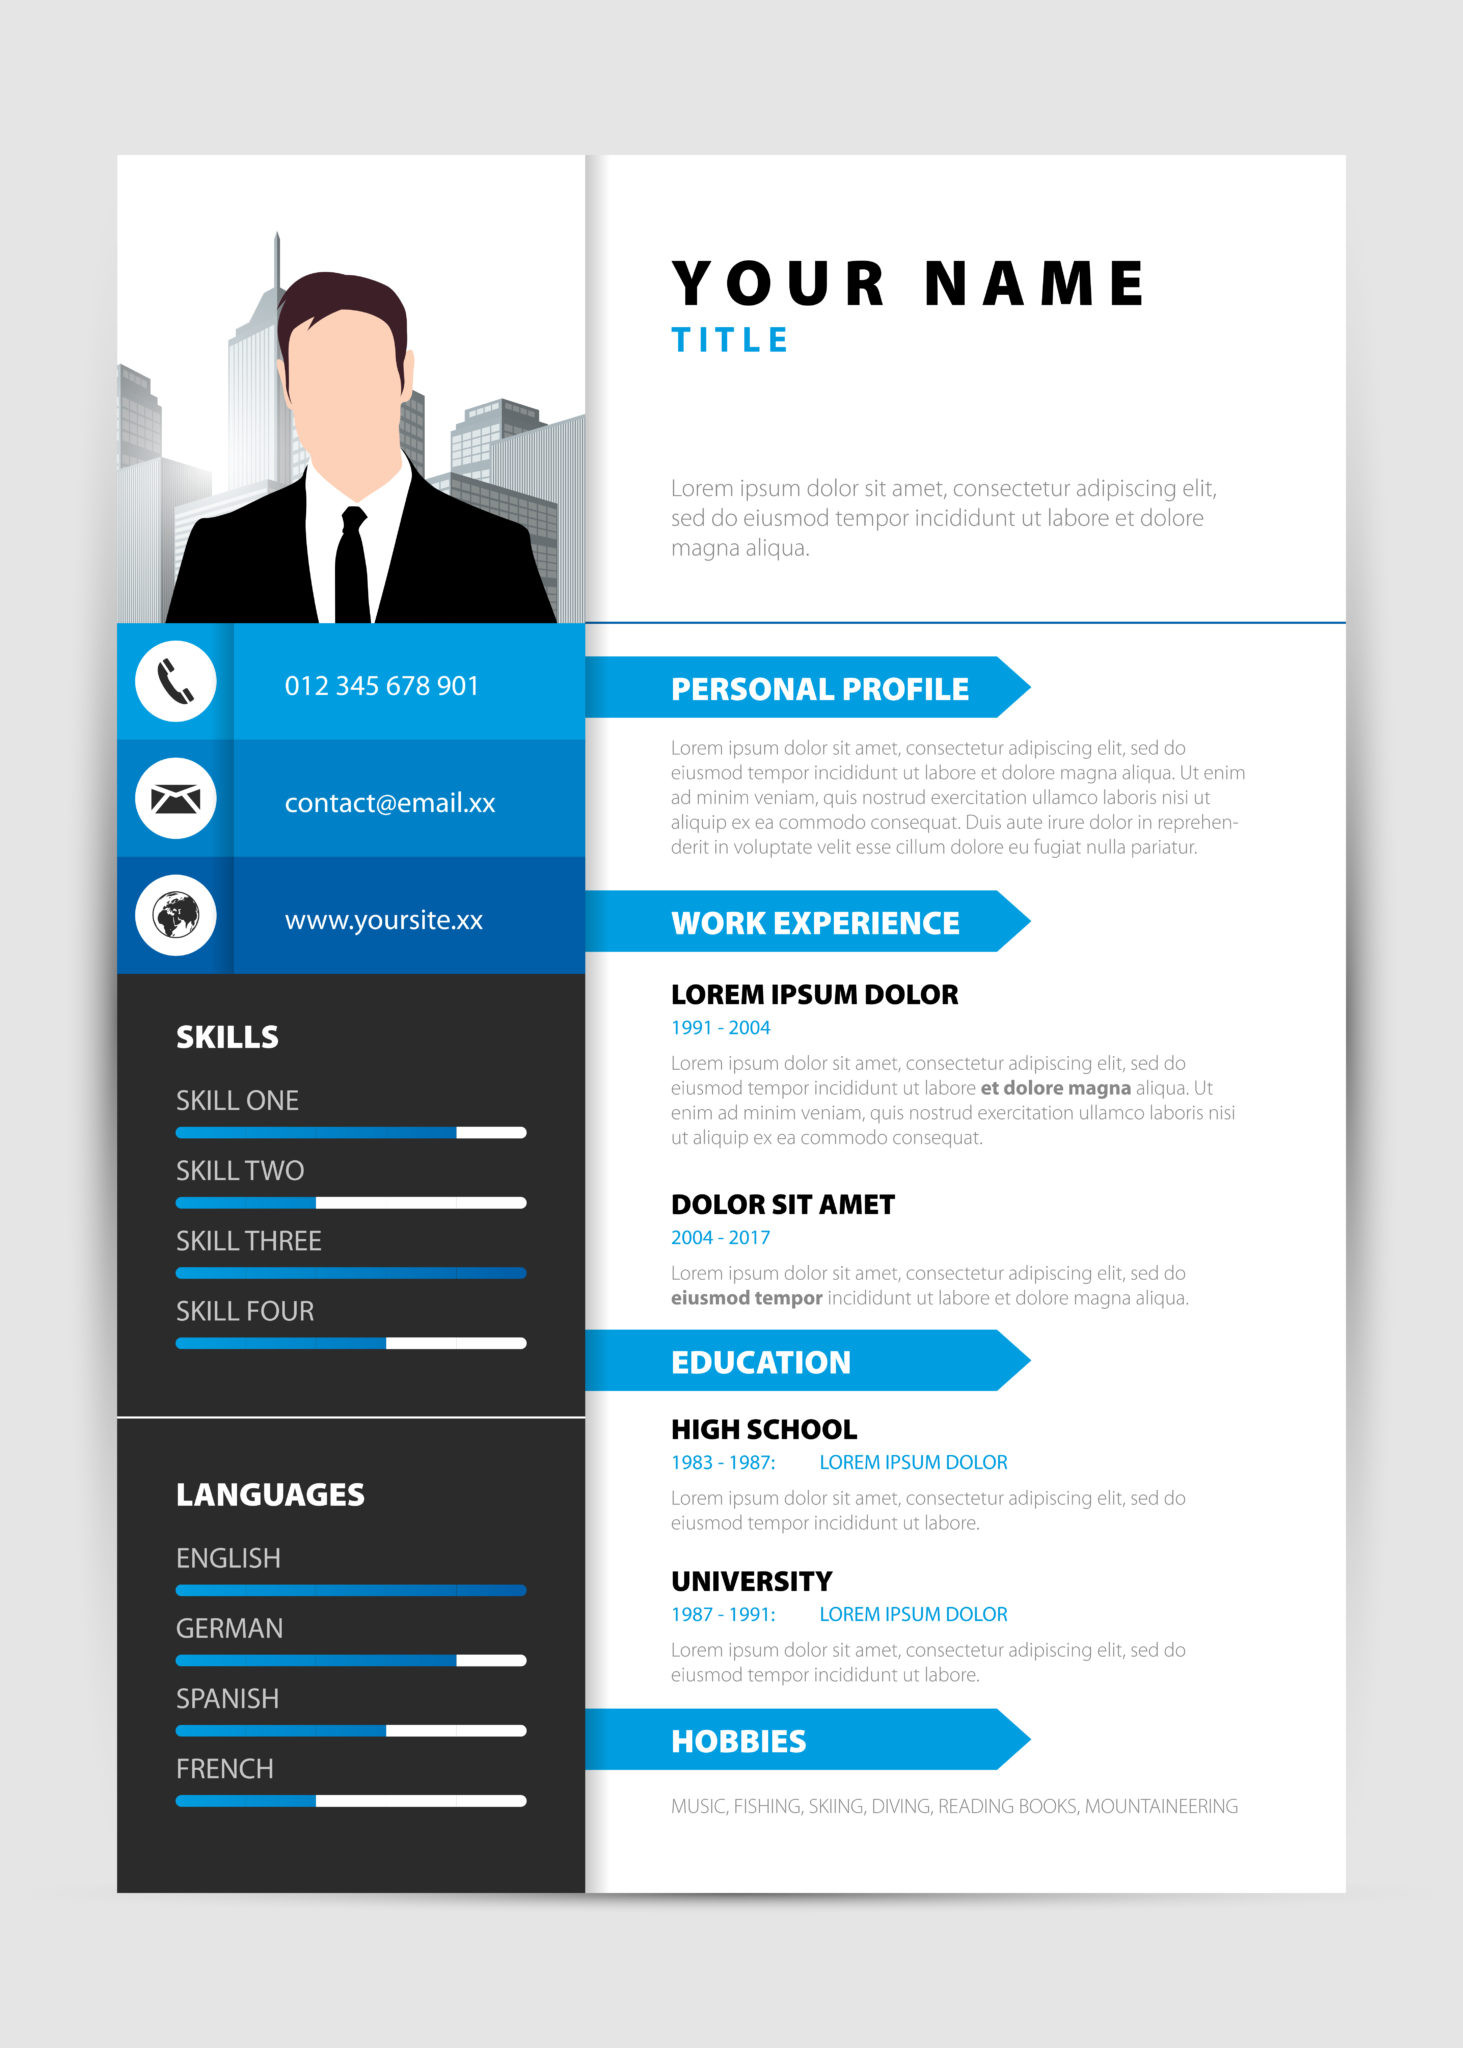 Sample Resume for Aws solution Architect associate Fresher Aws Resume How to Make Your Resume Look attractive Edureka